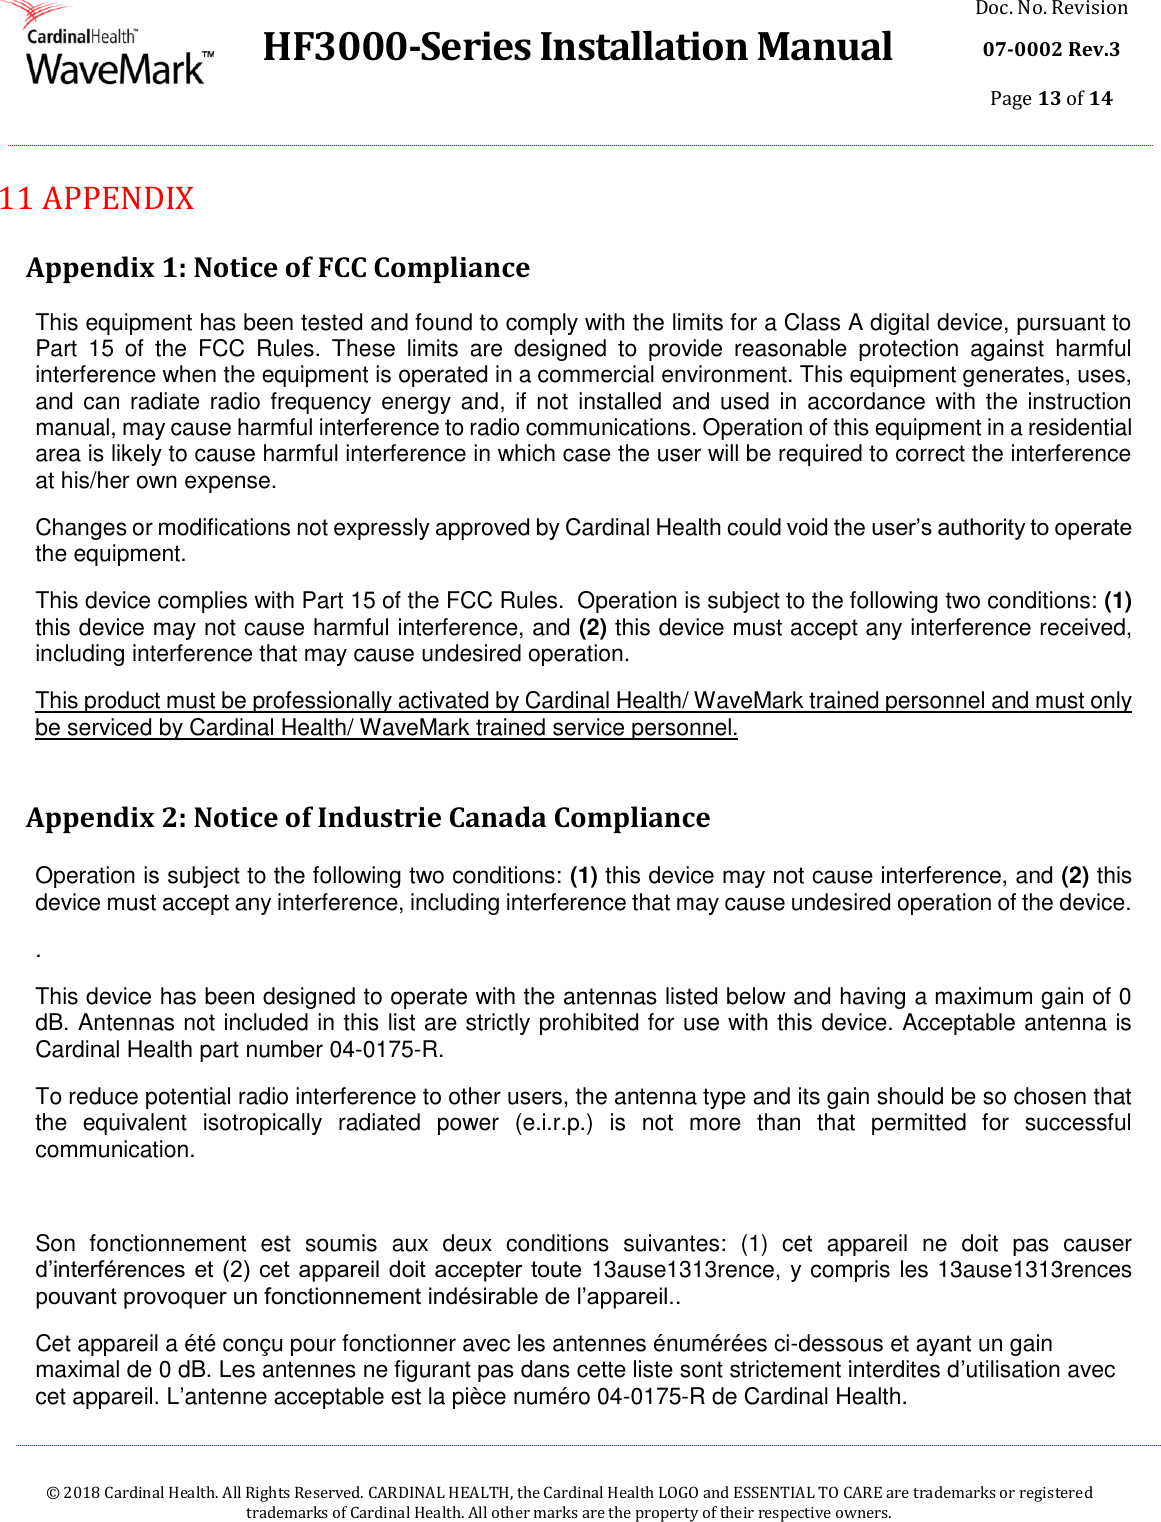  HF3000-Series Installation Manual Doc. No. Revision 07-0002 Rev.3 Page 13 of 14    © 2018 Cardinal Health. All Rights Reserved. CARDINAL HEALTH, the Cardinal Health LOGO and ESSENTIAL TO CARE are trademarks or registered trademarks of Cardinal Health. All other marks are the property of their respective owners.  11  APPENDIX  Appendix 1: Notice of FCC Compliance This equipment has been tested and found to comply with the limits for a Class A digital device, pursuant to Part  15  of  the  FCC  Rules.  These  limits  are  designed  to  provide  reasonable  protection  against  harmful interference when the equipment is operated in a commercial environment. This equipment generates, uses, and can  radiate radio frequency  energy and,  if not  installed  and  used  in accordance  with  the instruction manual, may cause harmful interference to radio communications. Operation of this equipment in a residential area is likely to cause harmful interference in which case the user will be required to correct the interference at his/her own expense. Changes or modifications not expressly approved by Cardinal Health could void the user’s authority to operate the equipment. This device complies with Part 15 of the FCC Rules.  Operation is subject to the following two conditions: (1) this device may not cause harmful interference, and (2) this device must accept any interference received, including interference that may cause undesired operation. This product must be professionally activated by Cardinal Health/ WaveMark trained personnel and must only be serviced by Cardinal Health/ WaveMark trained service personnel.  Appendix 2: Notice of Industrie Canada Compliance  Operation is subject to the following two conditions: (1) this device may not cause interference, and (2) this device must accept any interference, including interference that may cause undesired operation of the device. . This device has been designed to operate with the antennas listed below and having a maximum gain of 0 dB. Antennas not included in this list are strictly prohibited for use with this device. Acceptable antenna is Cardinal Health part number 04-0175-R. To reduce potential radio interference to other users, the antenna type and its gain should be so chosen that the  equivalent  isotropically  radiated  power  (e.i.r.p.)  is  not  more  than  that  permitted  for  successful communication.  Son  fonctionnement  est  soumis  aux  deux  conditions  suivantes:  (1)  cet  appareil  ne  doit  pas  causer d’interférences et (2) cet  appareil doit accepter toute 13ause1313rence, y compris les 13ause1313rences pouvant provoquer un fonctionnement indésirable de l’appareil.. Cet appareil a été conçu pour fonctionner avec les antennes énumérées ci-dessous et ayant un gain maximal de 0 dB. Les antennes ne figurant pas dans cette liste sont strictement interdites d’utilisation avec cet appareil. L’antenne acceptable est la pièce numéro 04-0175-R de Cardinal Health. 